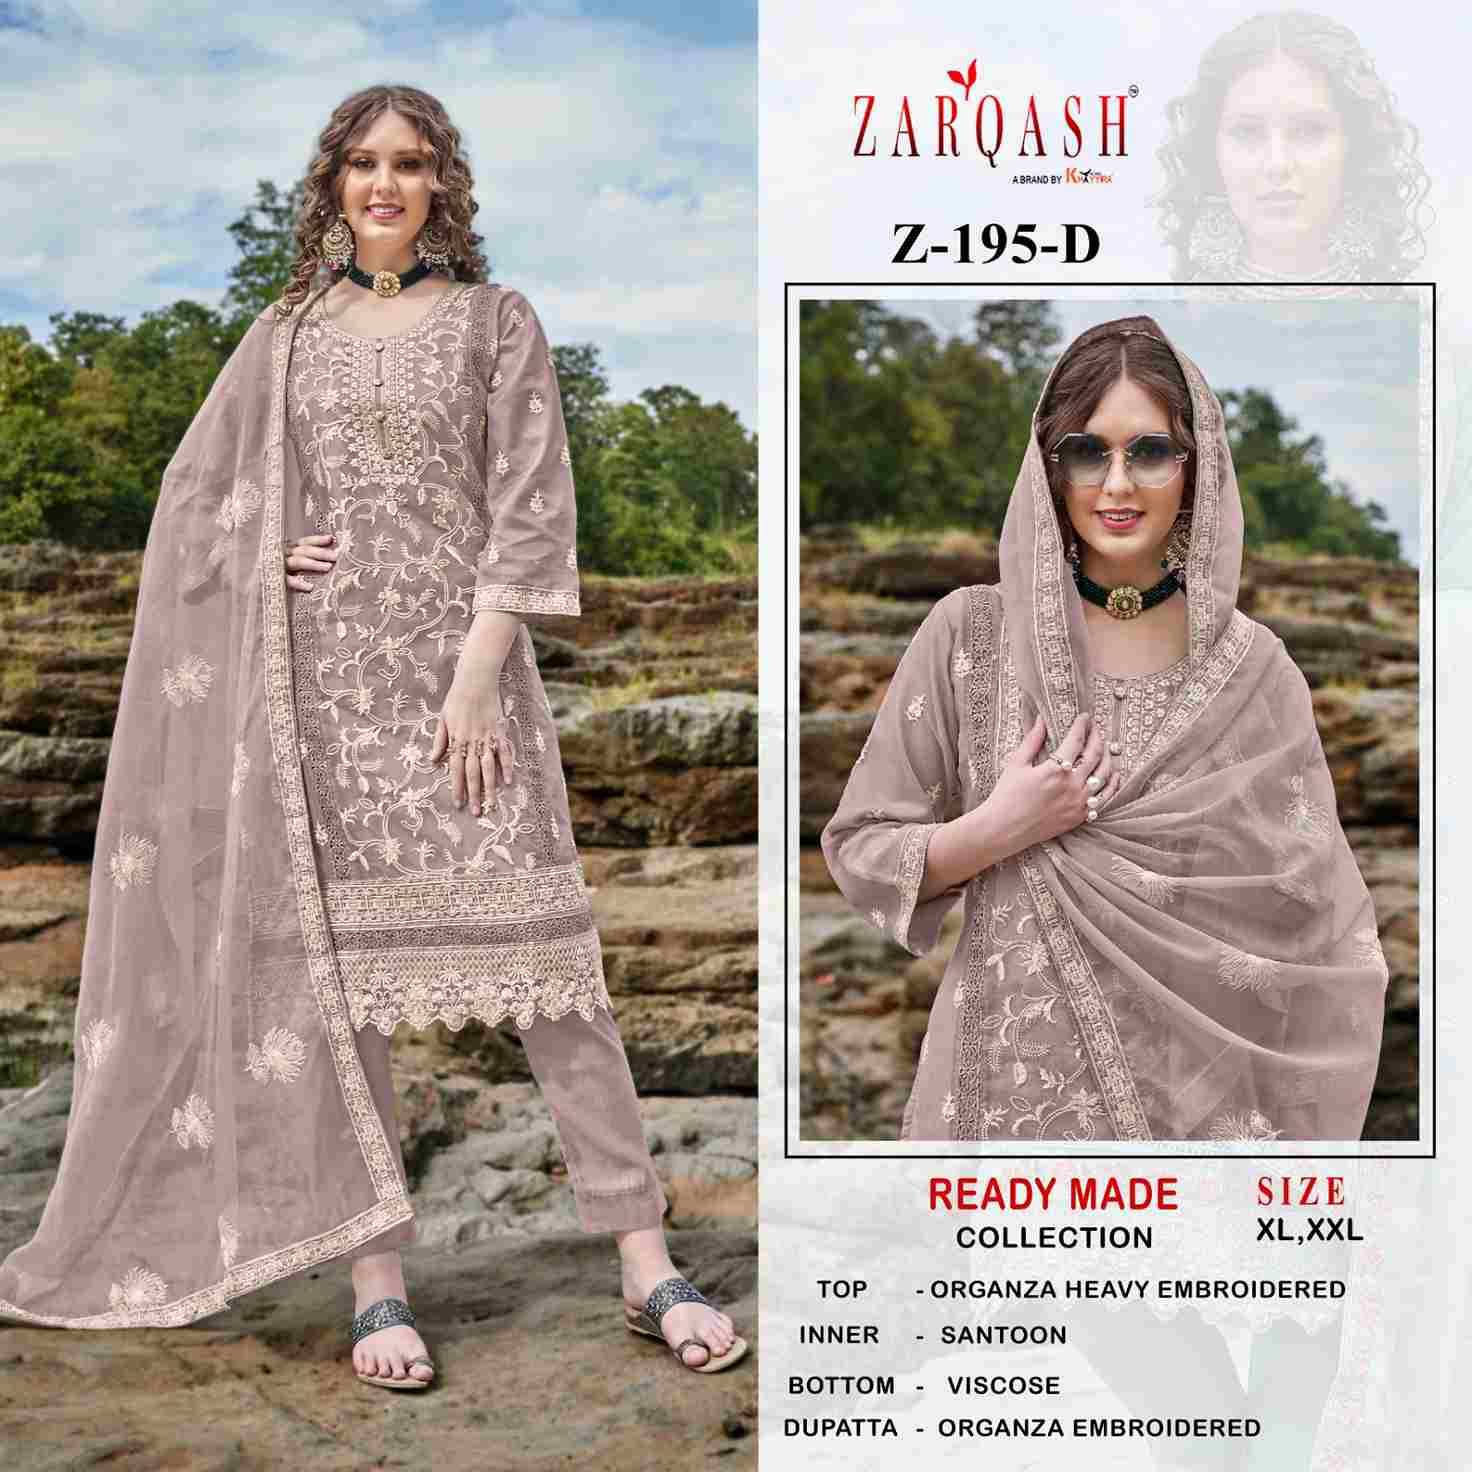 Zarqash Hit Design Z-195 Colours By Zarqash Z-195-A To Z-195-D Series Beautiful Pakistani Suits Colorful Stylish Fancy Casual Wear & Ethnic Wear Organza Dresses At Wholesale Price